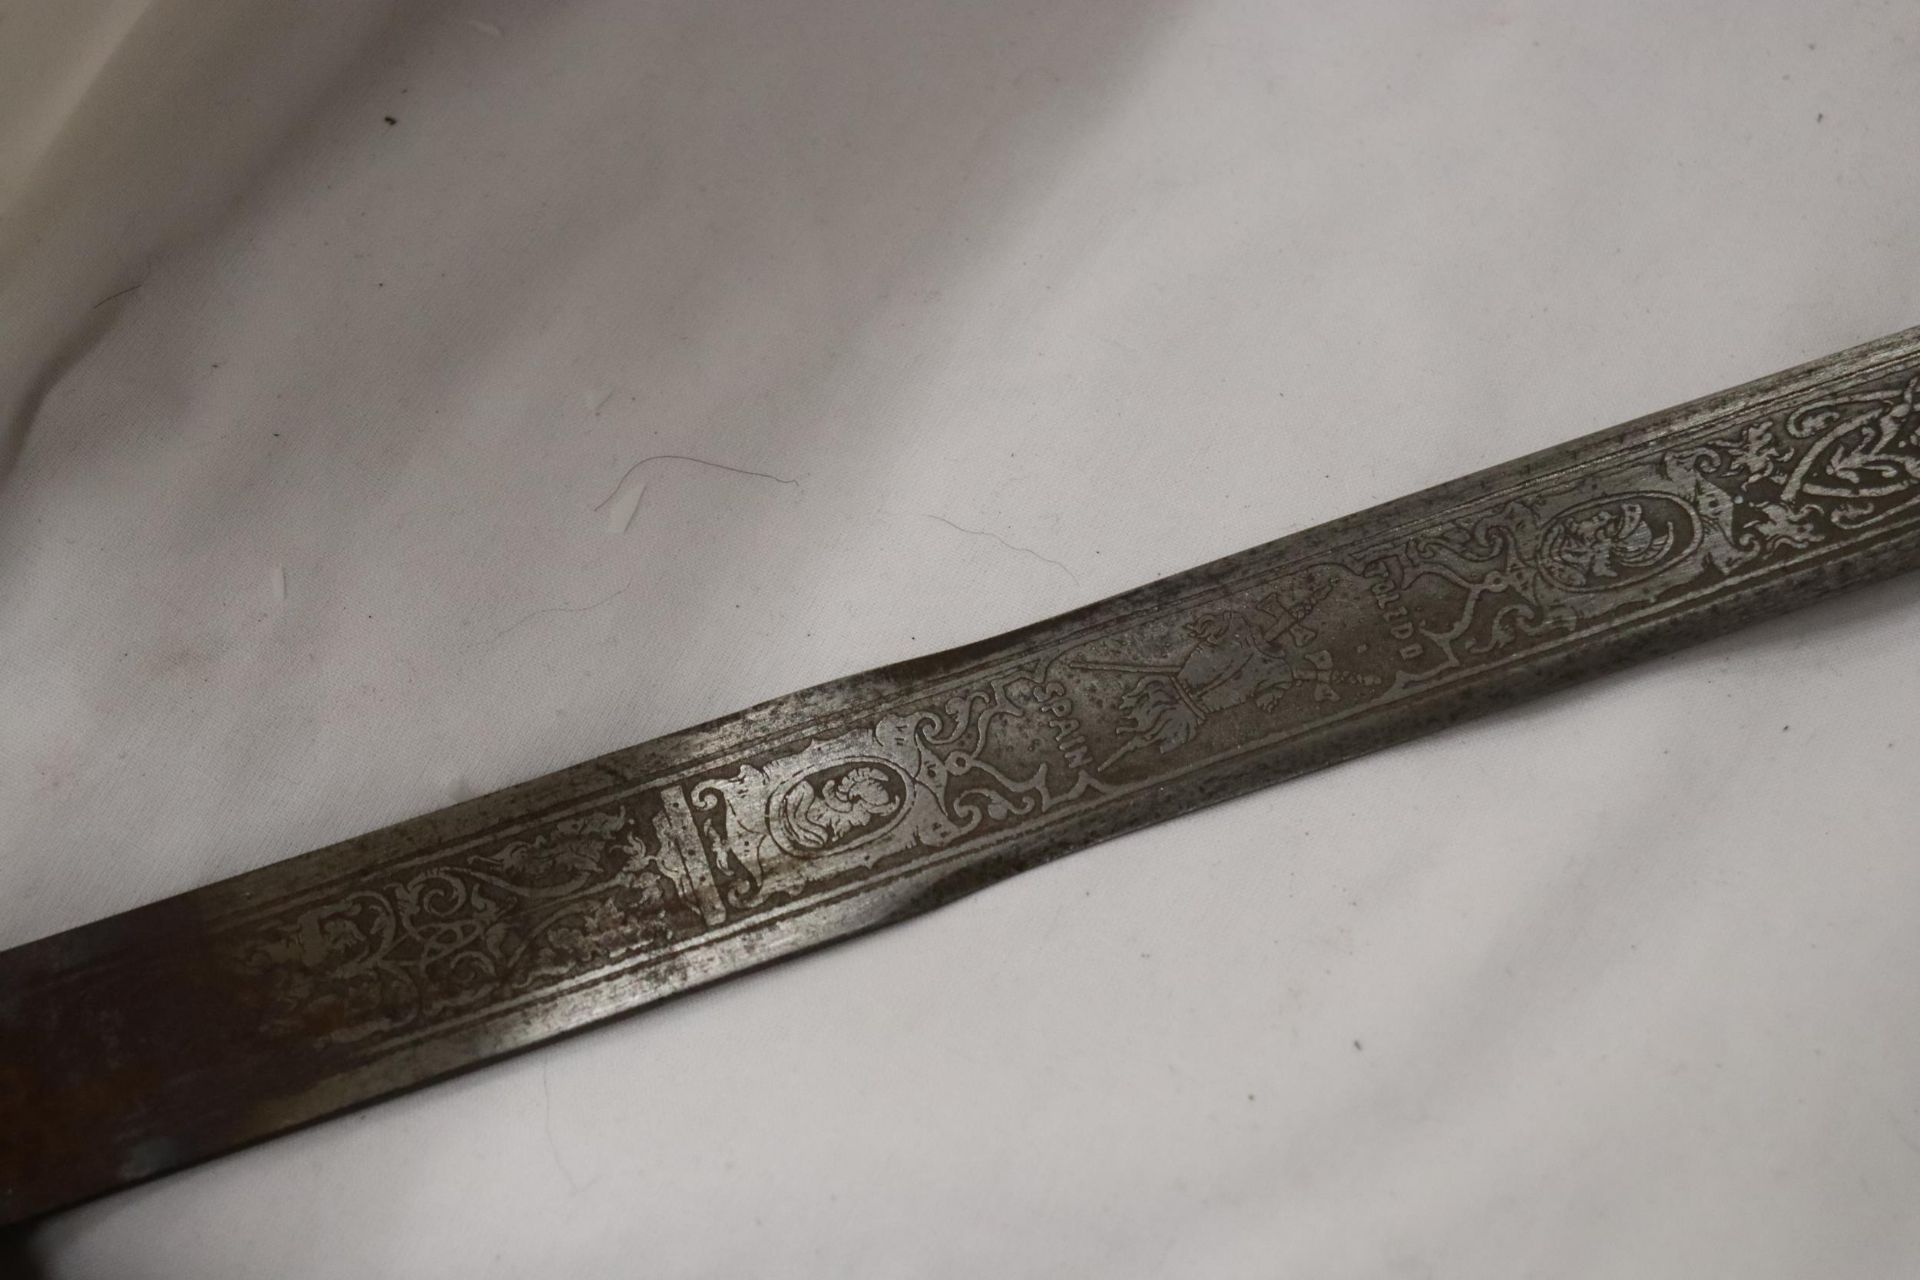 A VINTAGE SWORD WITH A BASKET HILT AND ENGRAVING TO THE TOP OF THE BLADE - Image 3 of 9